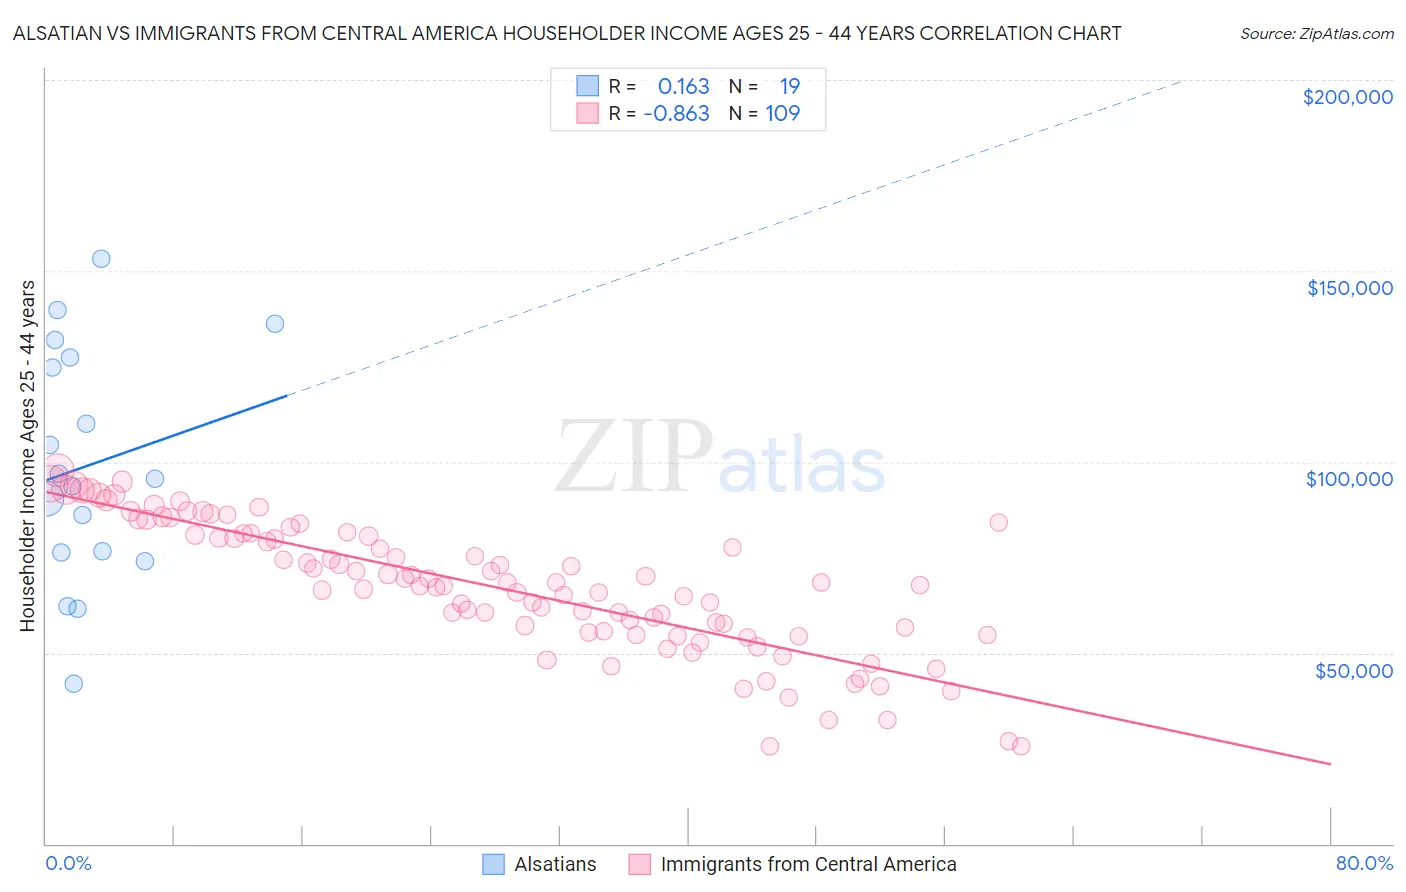 Alsatian vs Immigrants from Central America Householder Income Ages 25 - 44 years